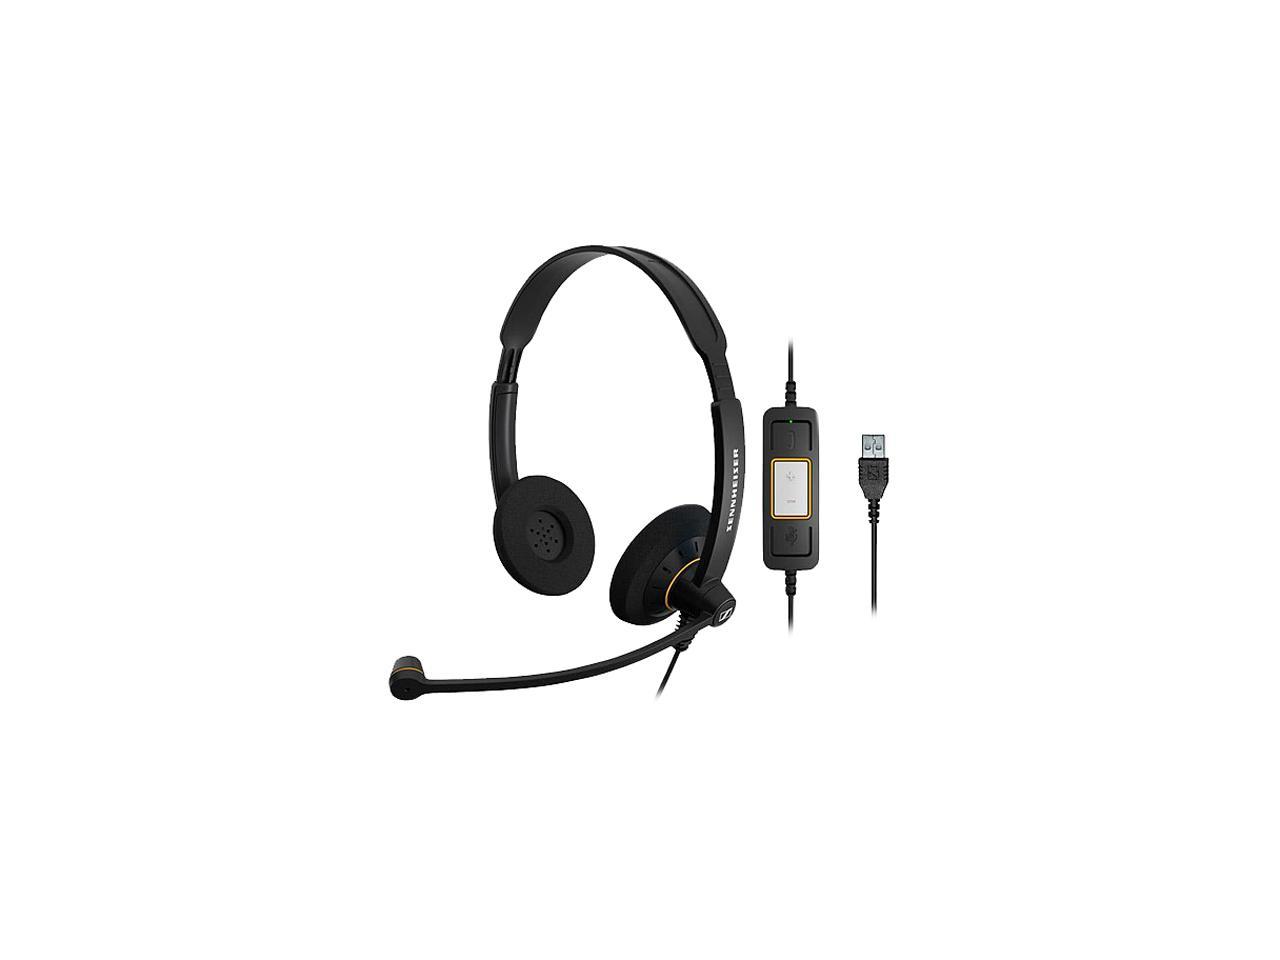 Sennheiser SC 60 USB ML (504547) Double-Sided Business Headset For Skype for Business with HD Sound, Noise-Cancelling Microphone, & USB Connector (Black)